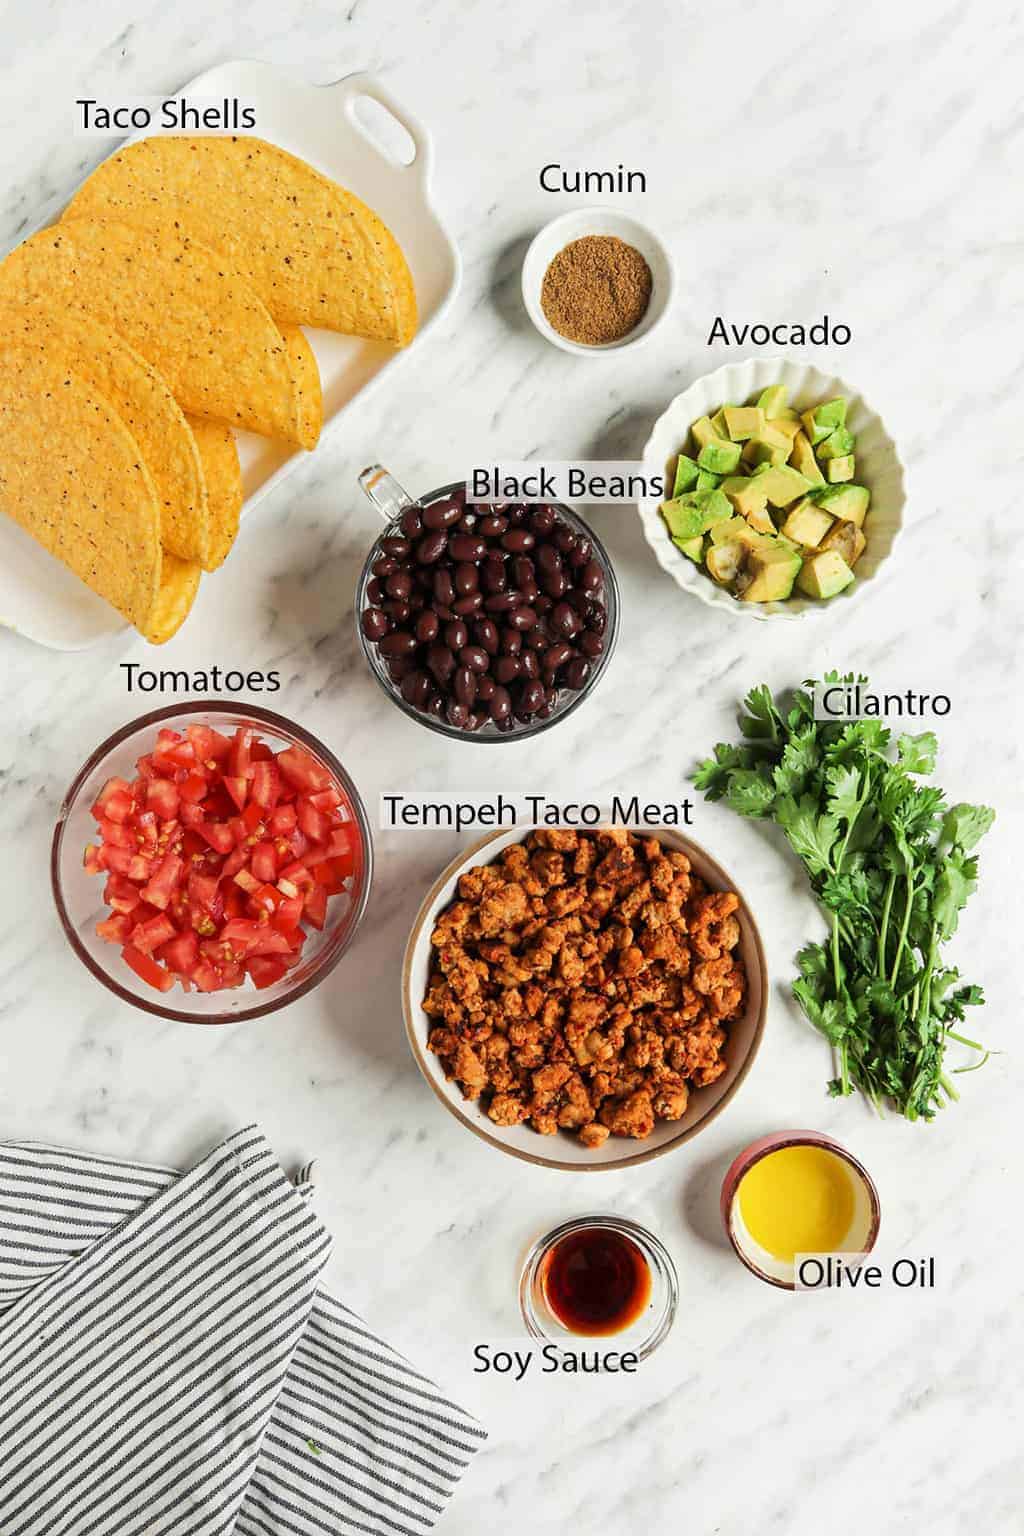 ingredients for homemade tacos including tempeh, cilantro, oil, soy sauce, tomatoes, avocado, black beans, cumin, and taco shells